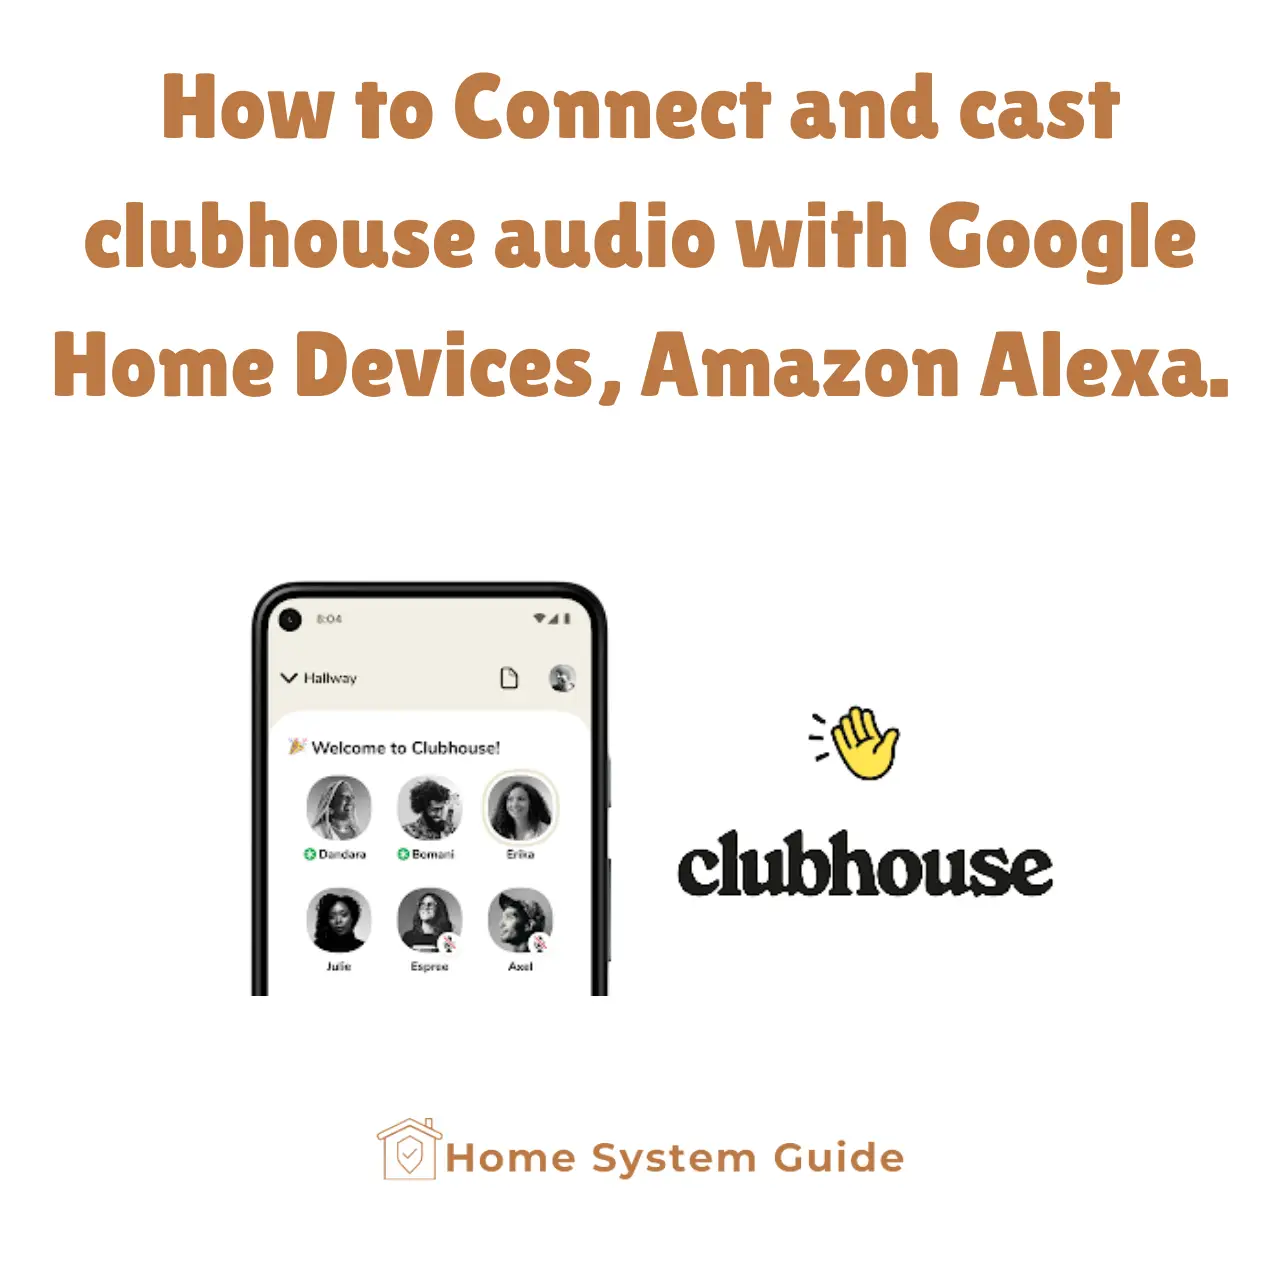 How to Connect and cast clubhouse audio with Google Home Devices, Amazon Alexa.